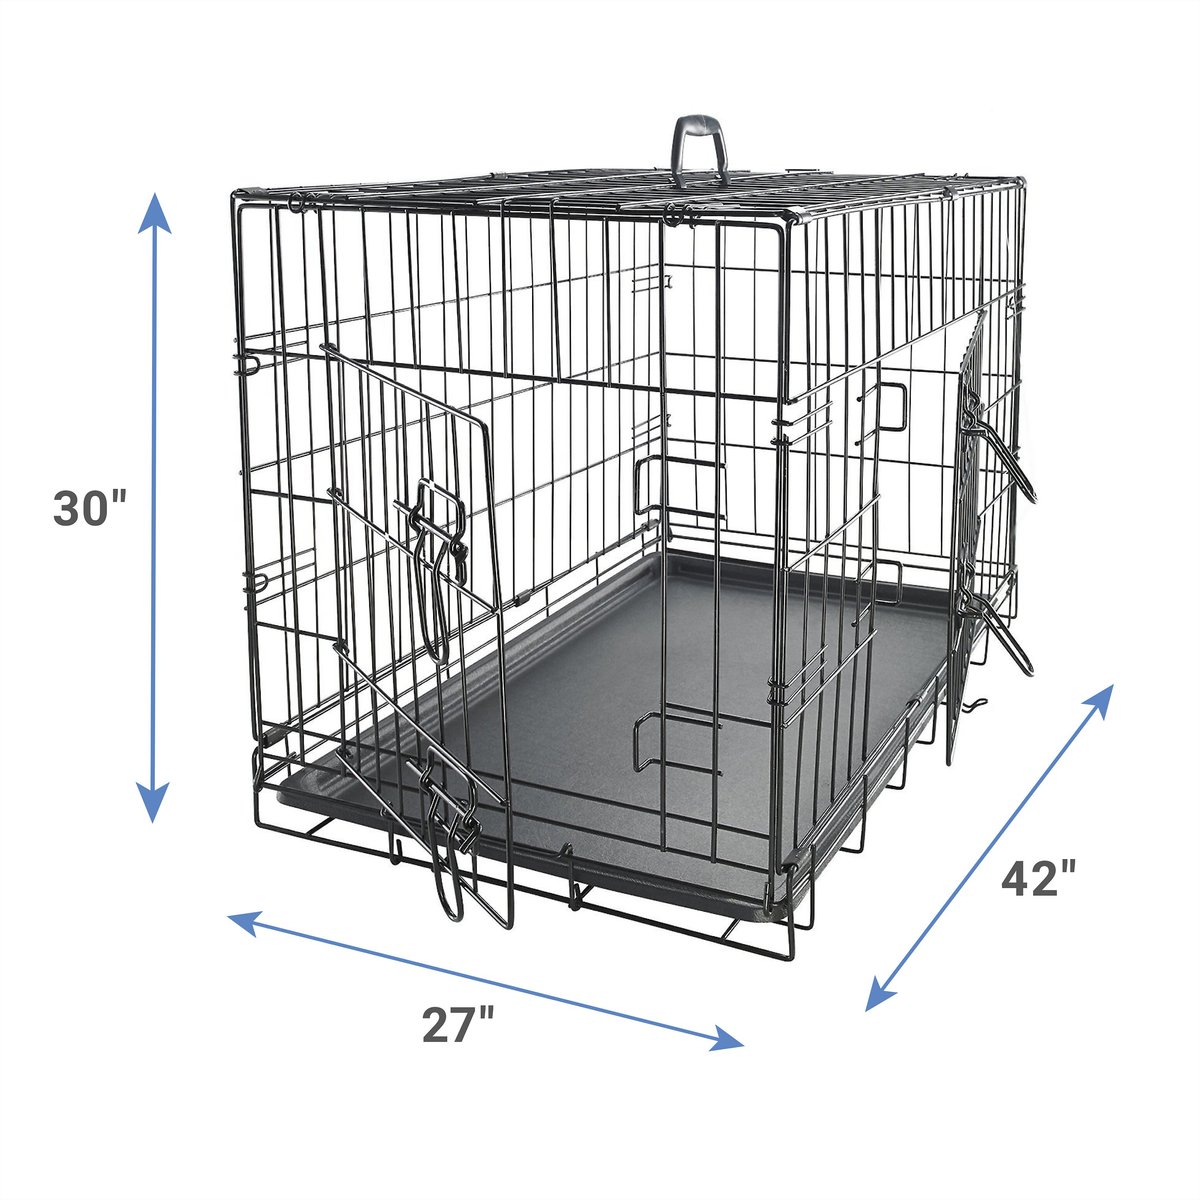 Paws & Pals Wire Dog Crate with Tray Double Door (42-inch) (XL) - image 3 of 12